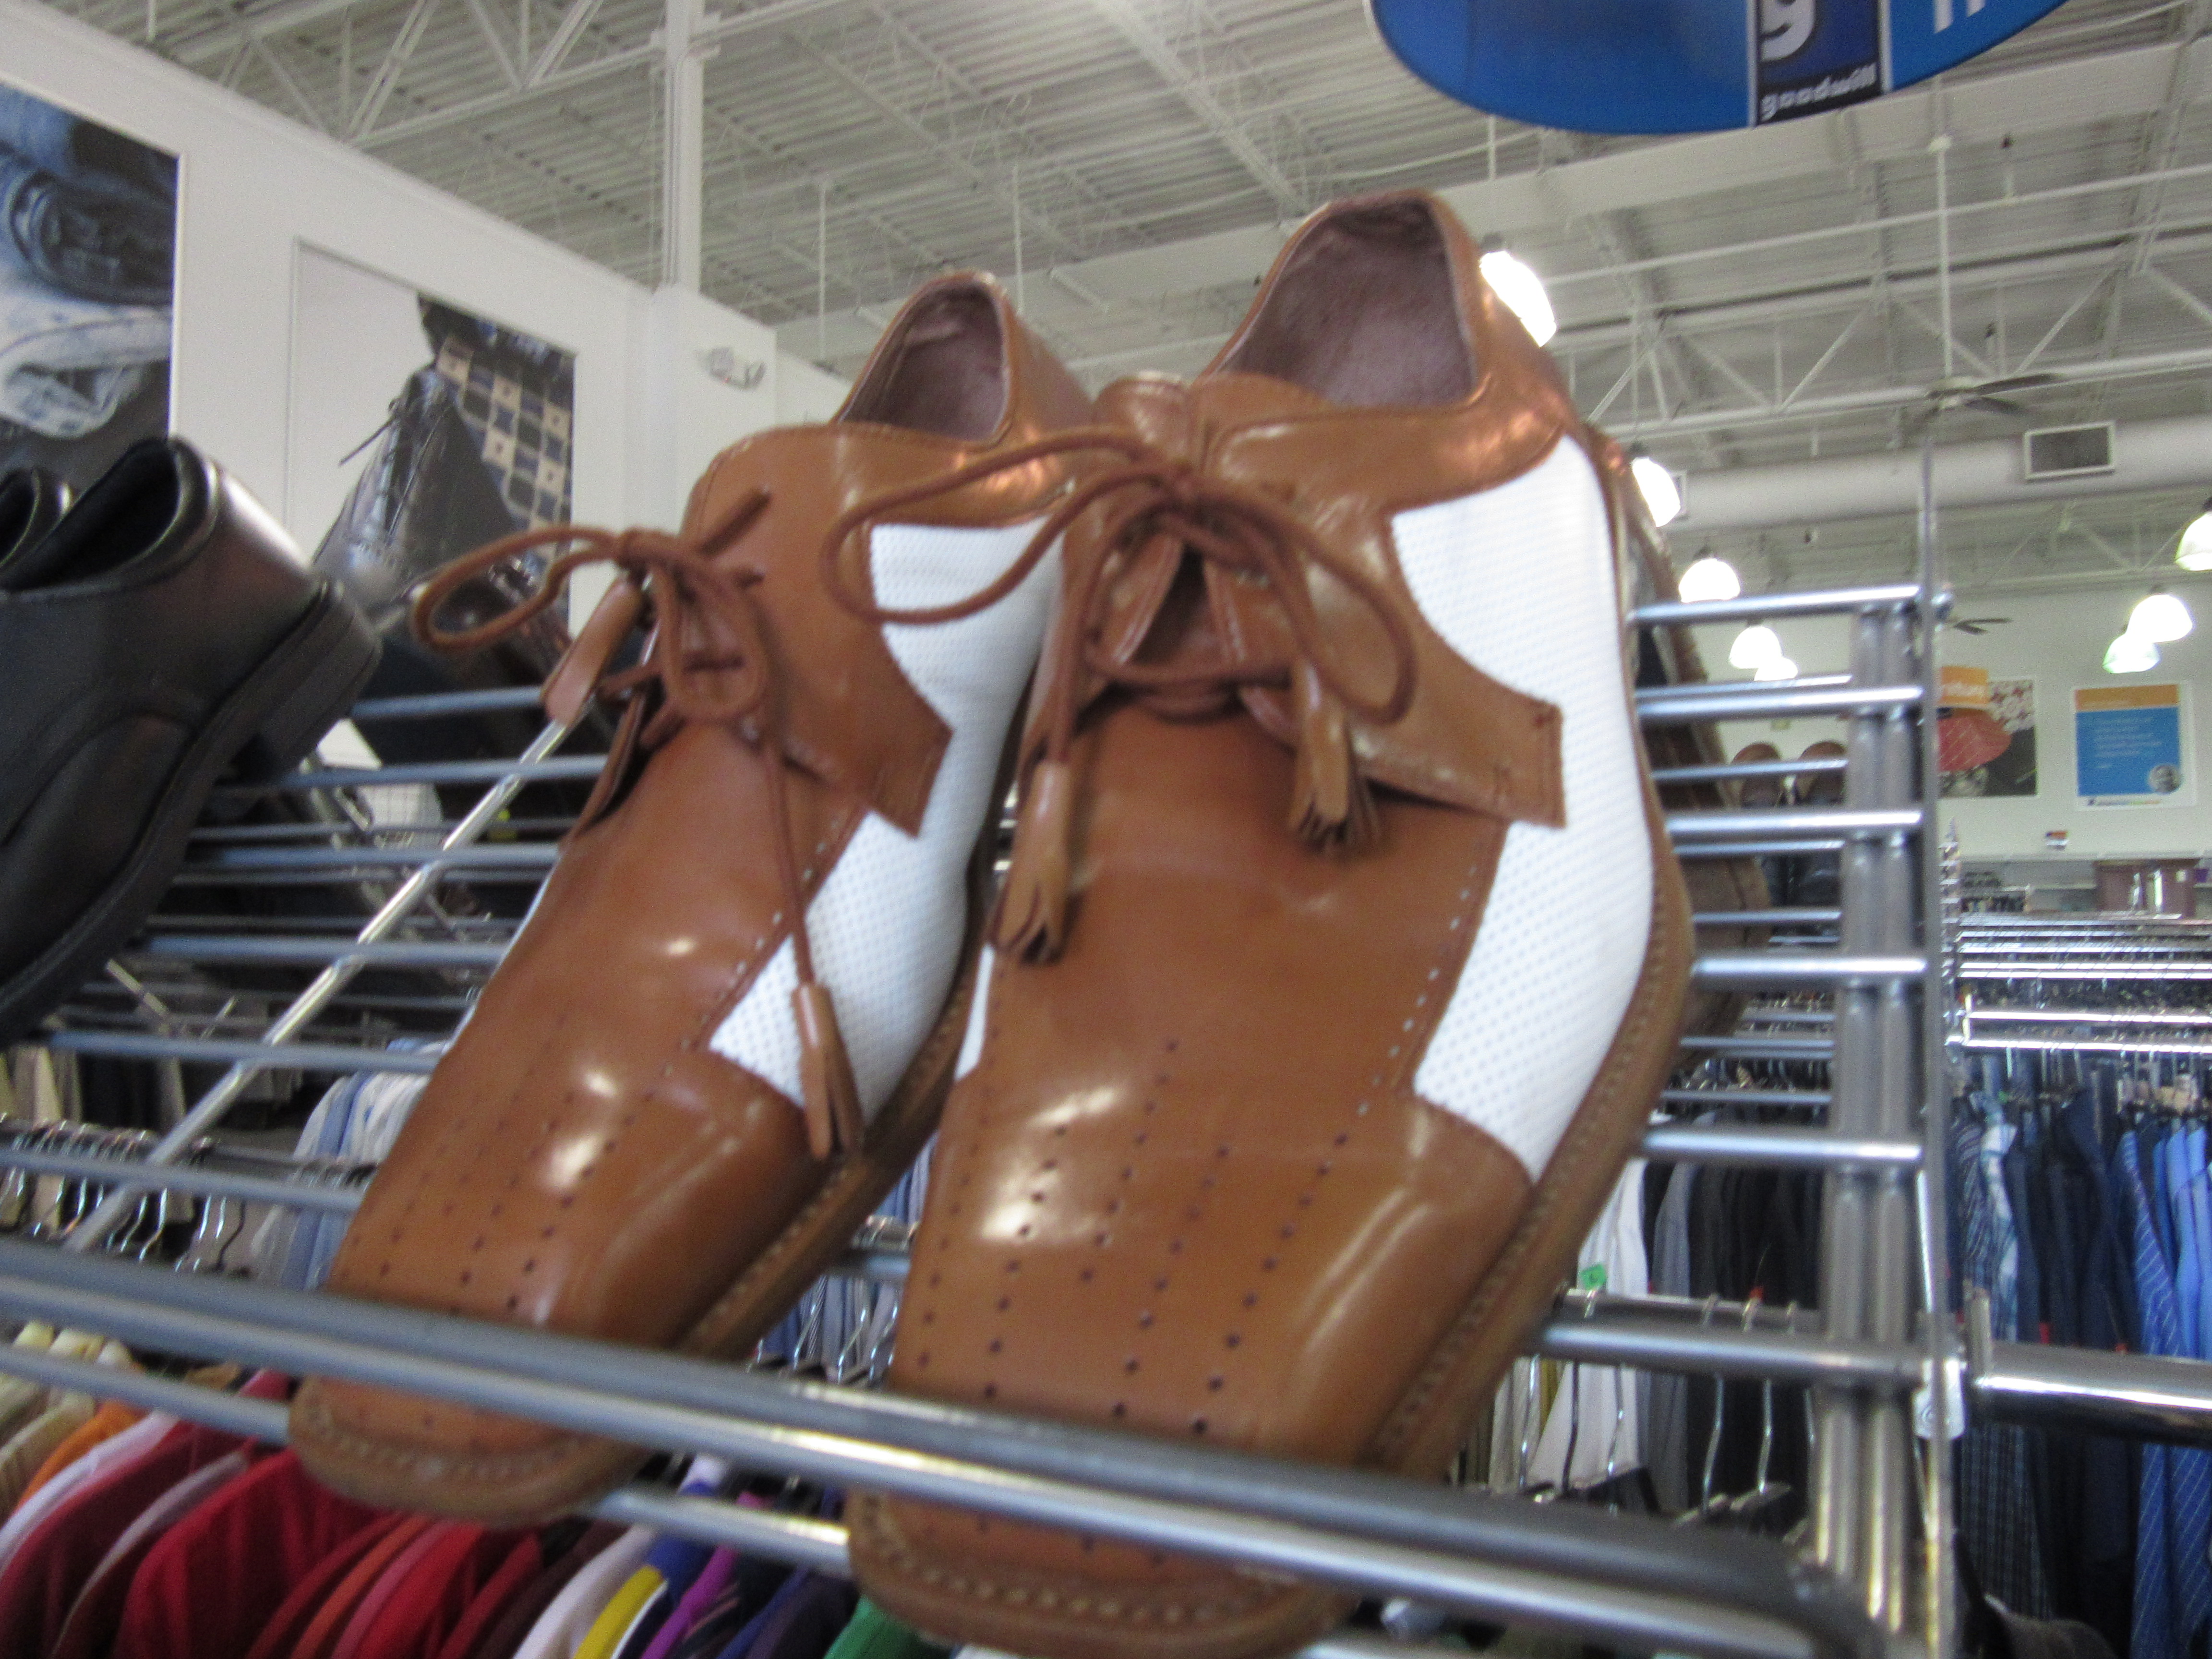 designer men's shoes found at the Bowie, MD Goodwill